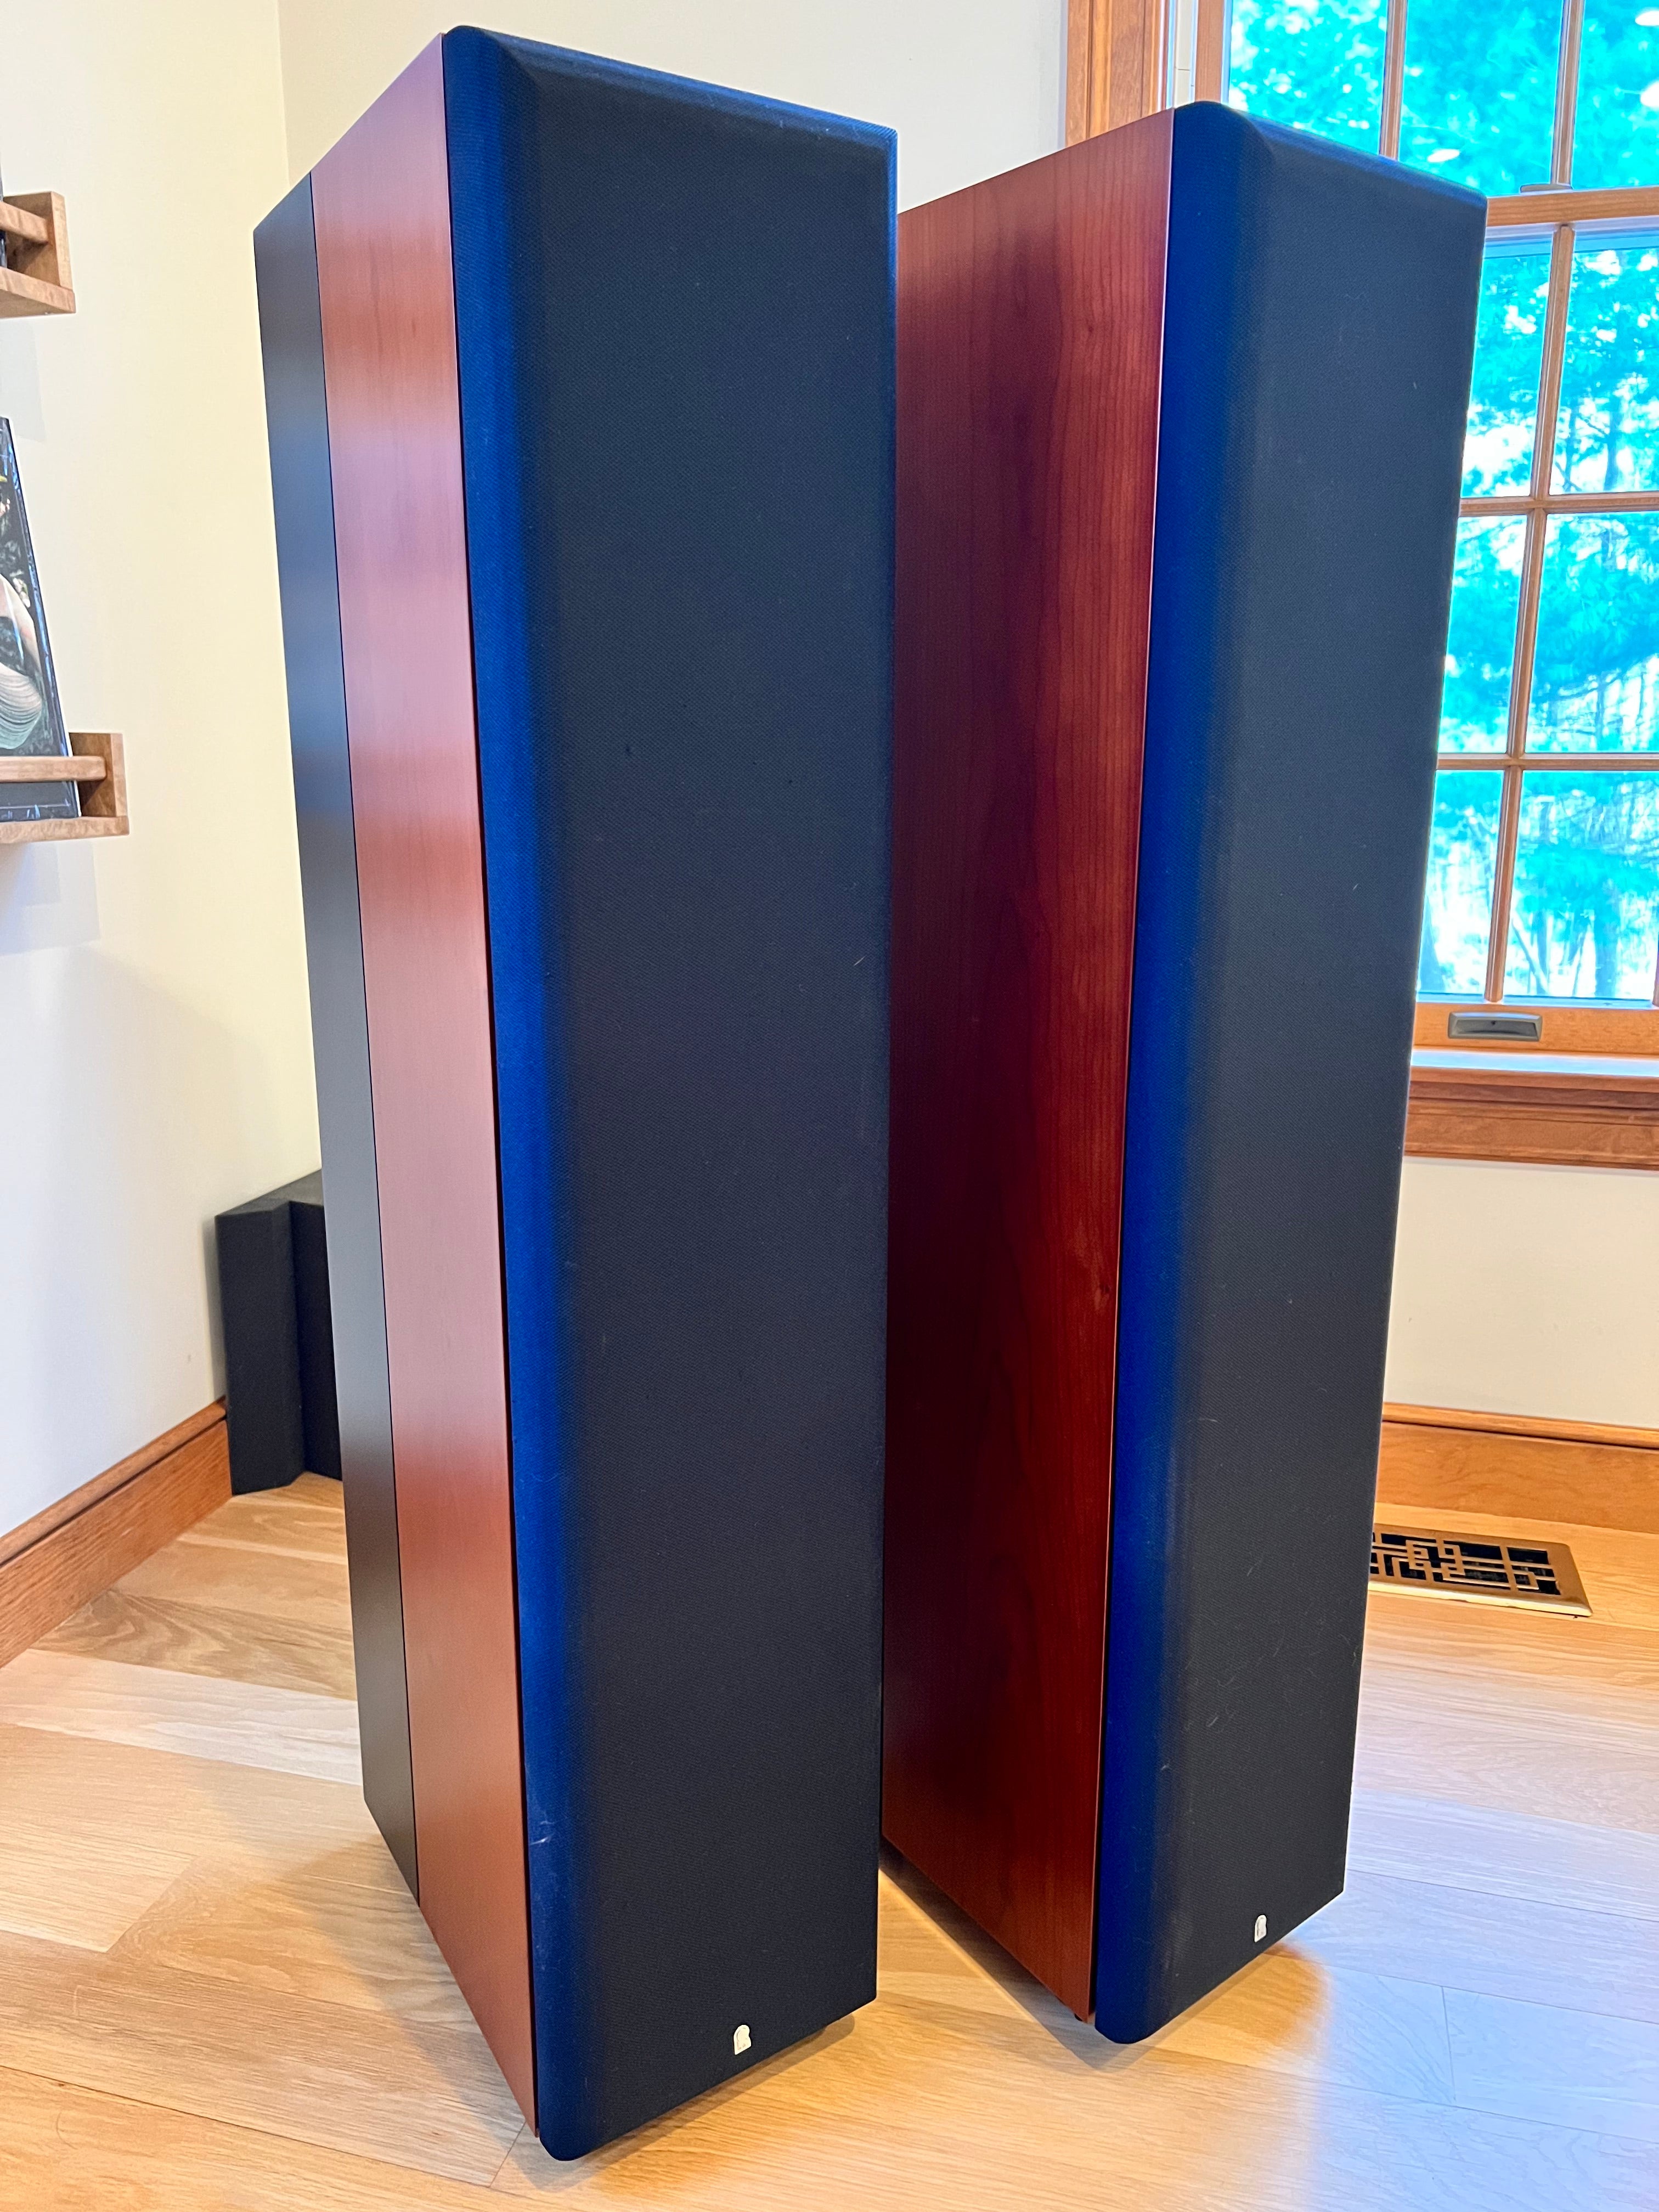 Revel Performa F32 Speakers, Wood Finish SOLD – Holt Hill